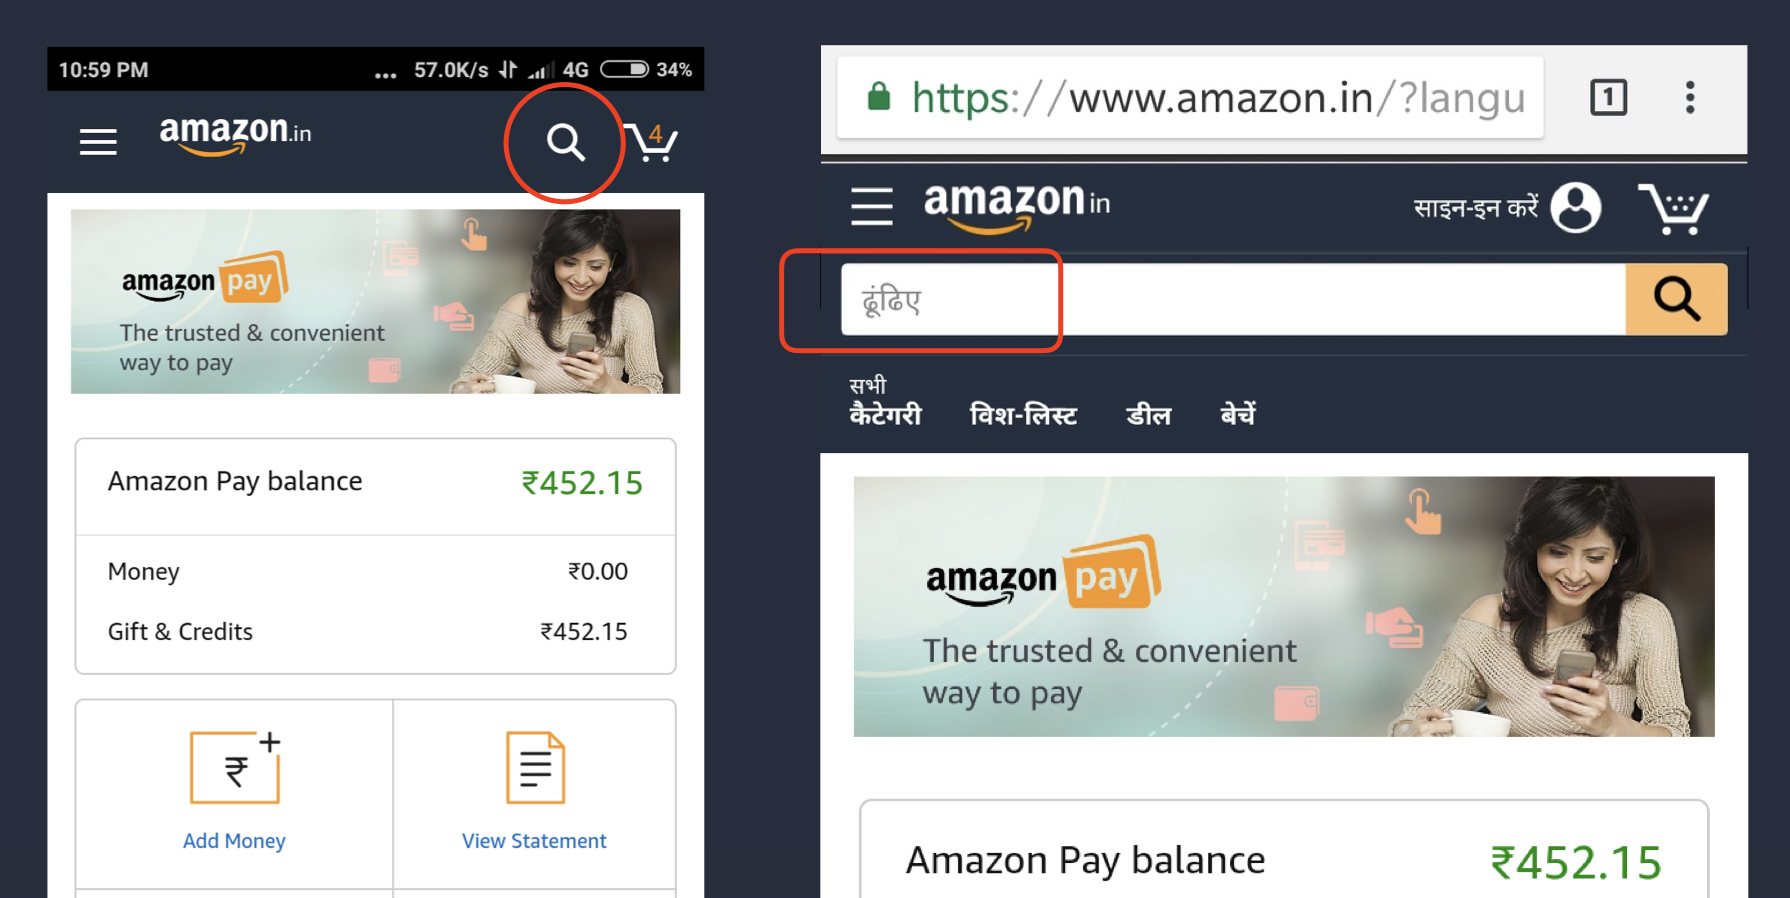 Cross-cultural design challenges with Amazon India mobile site